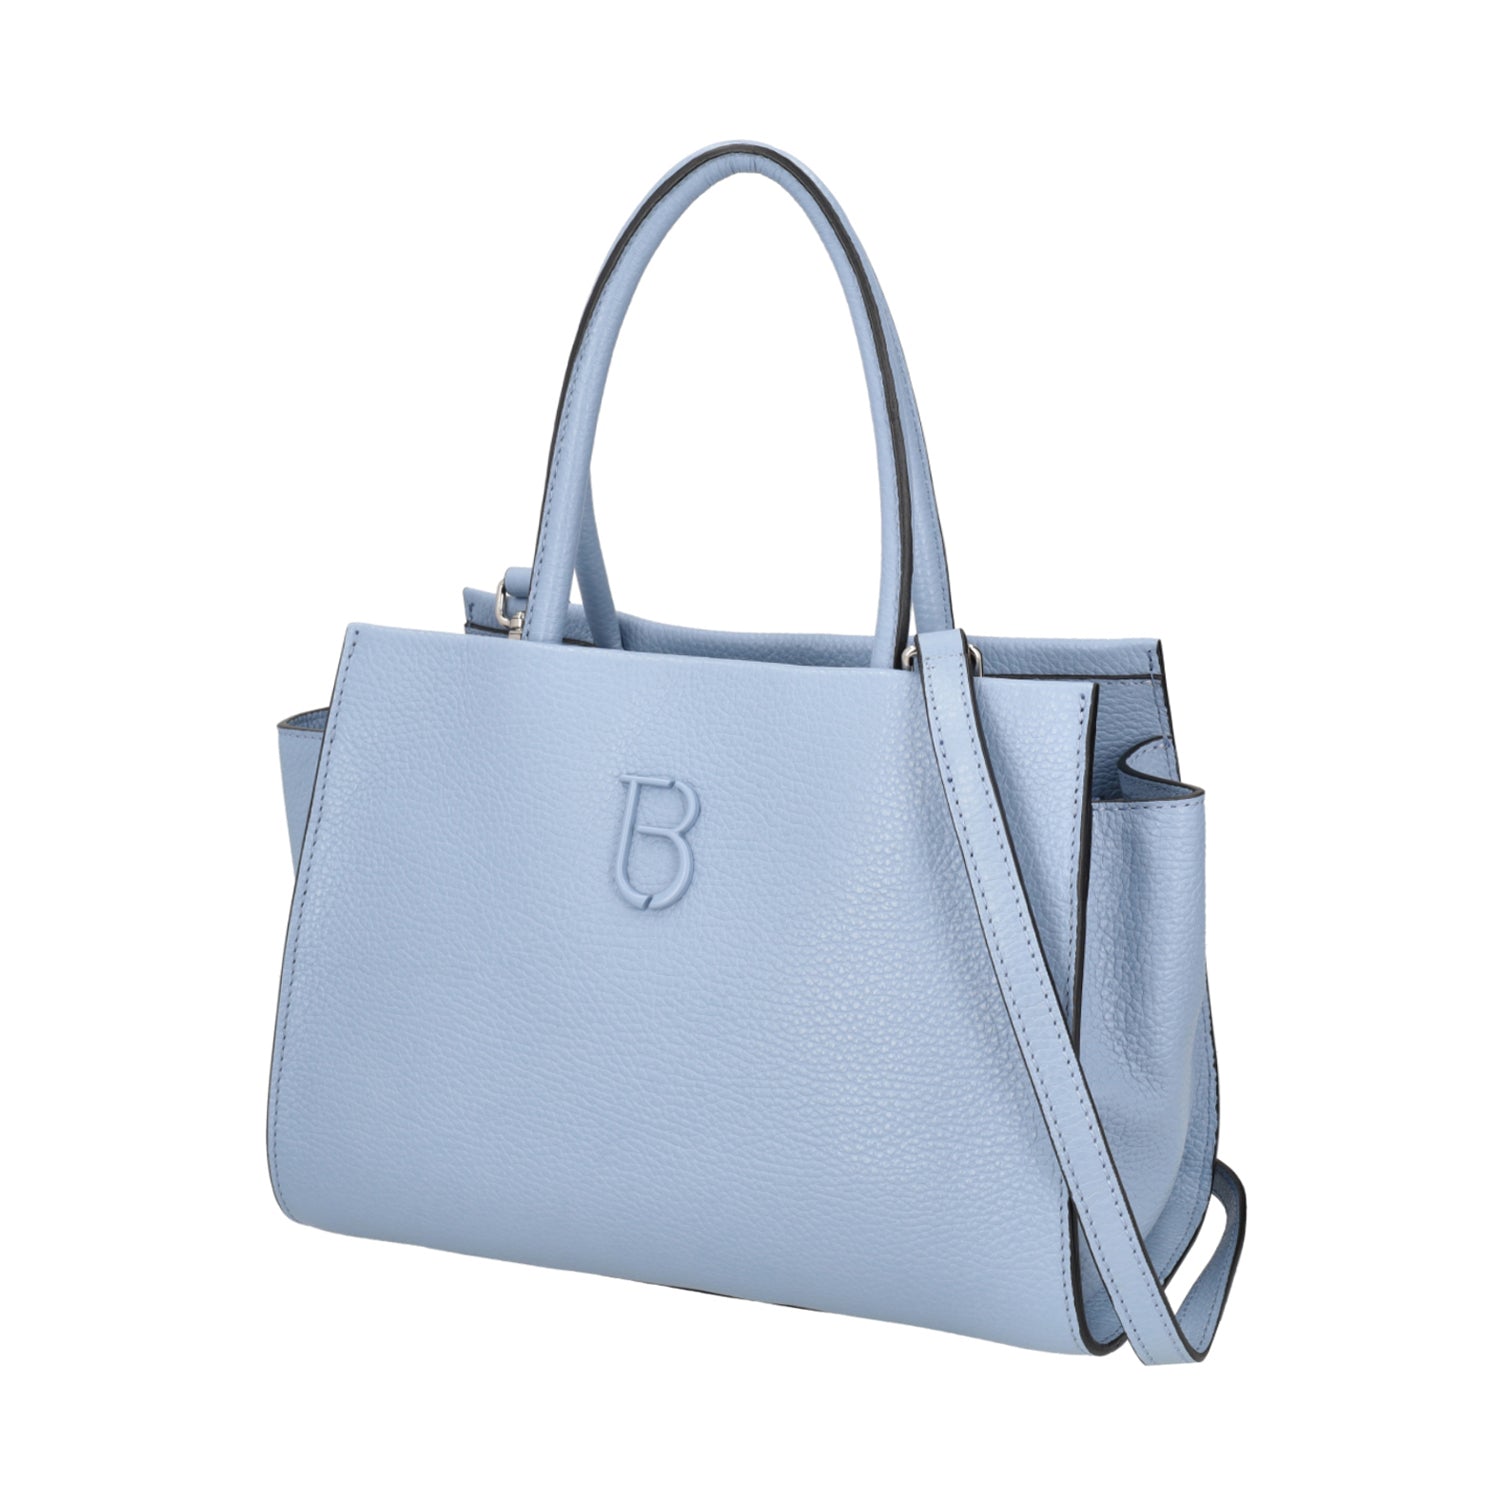 LIGHT BLUE NARCISO HAND BAG IN LEATHER